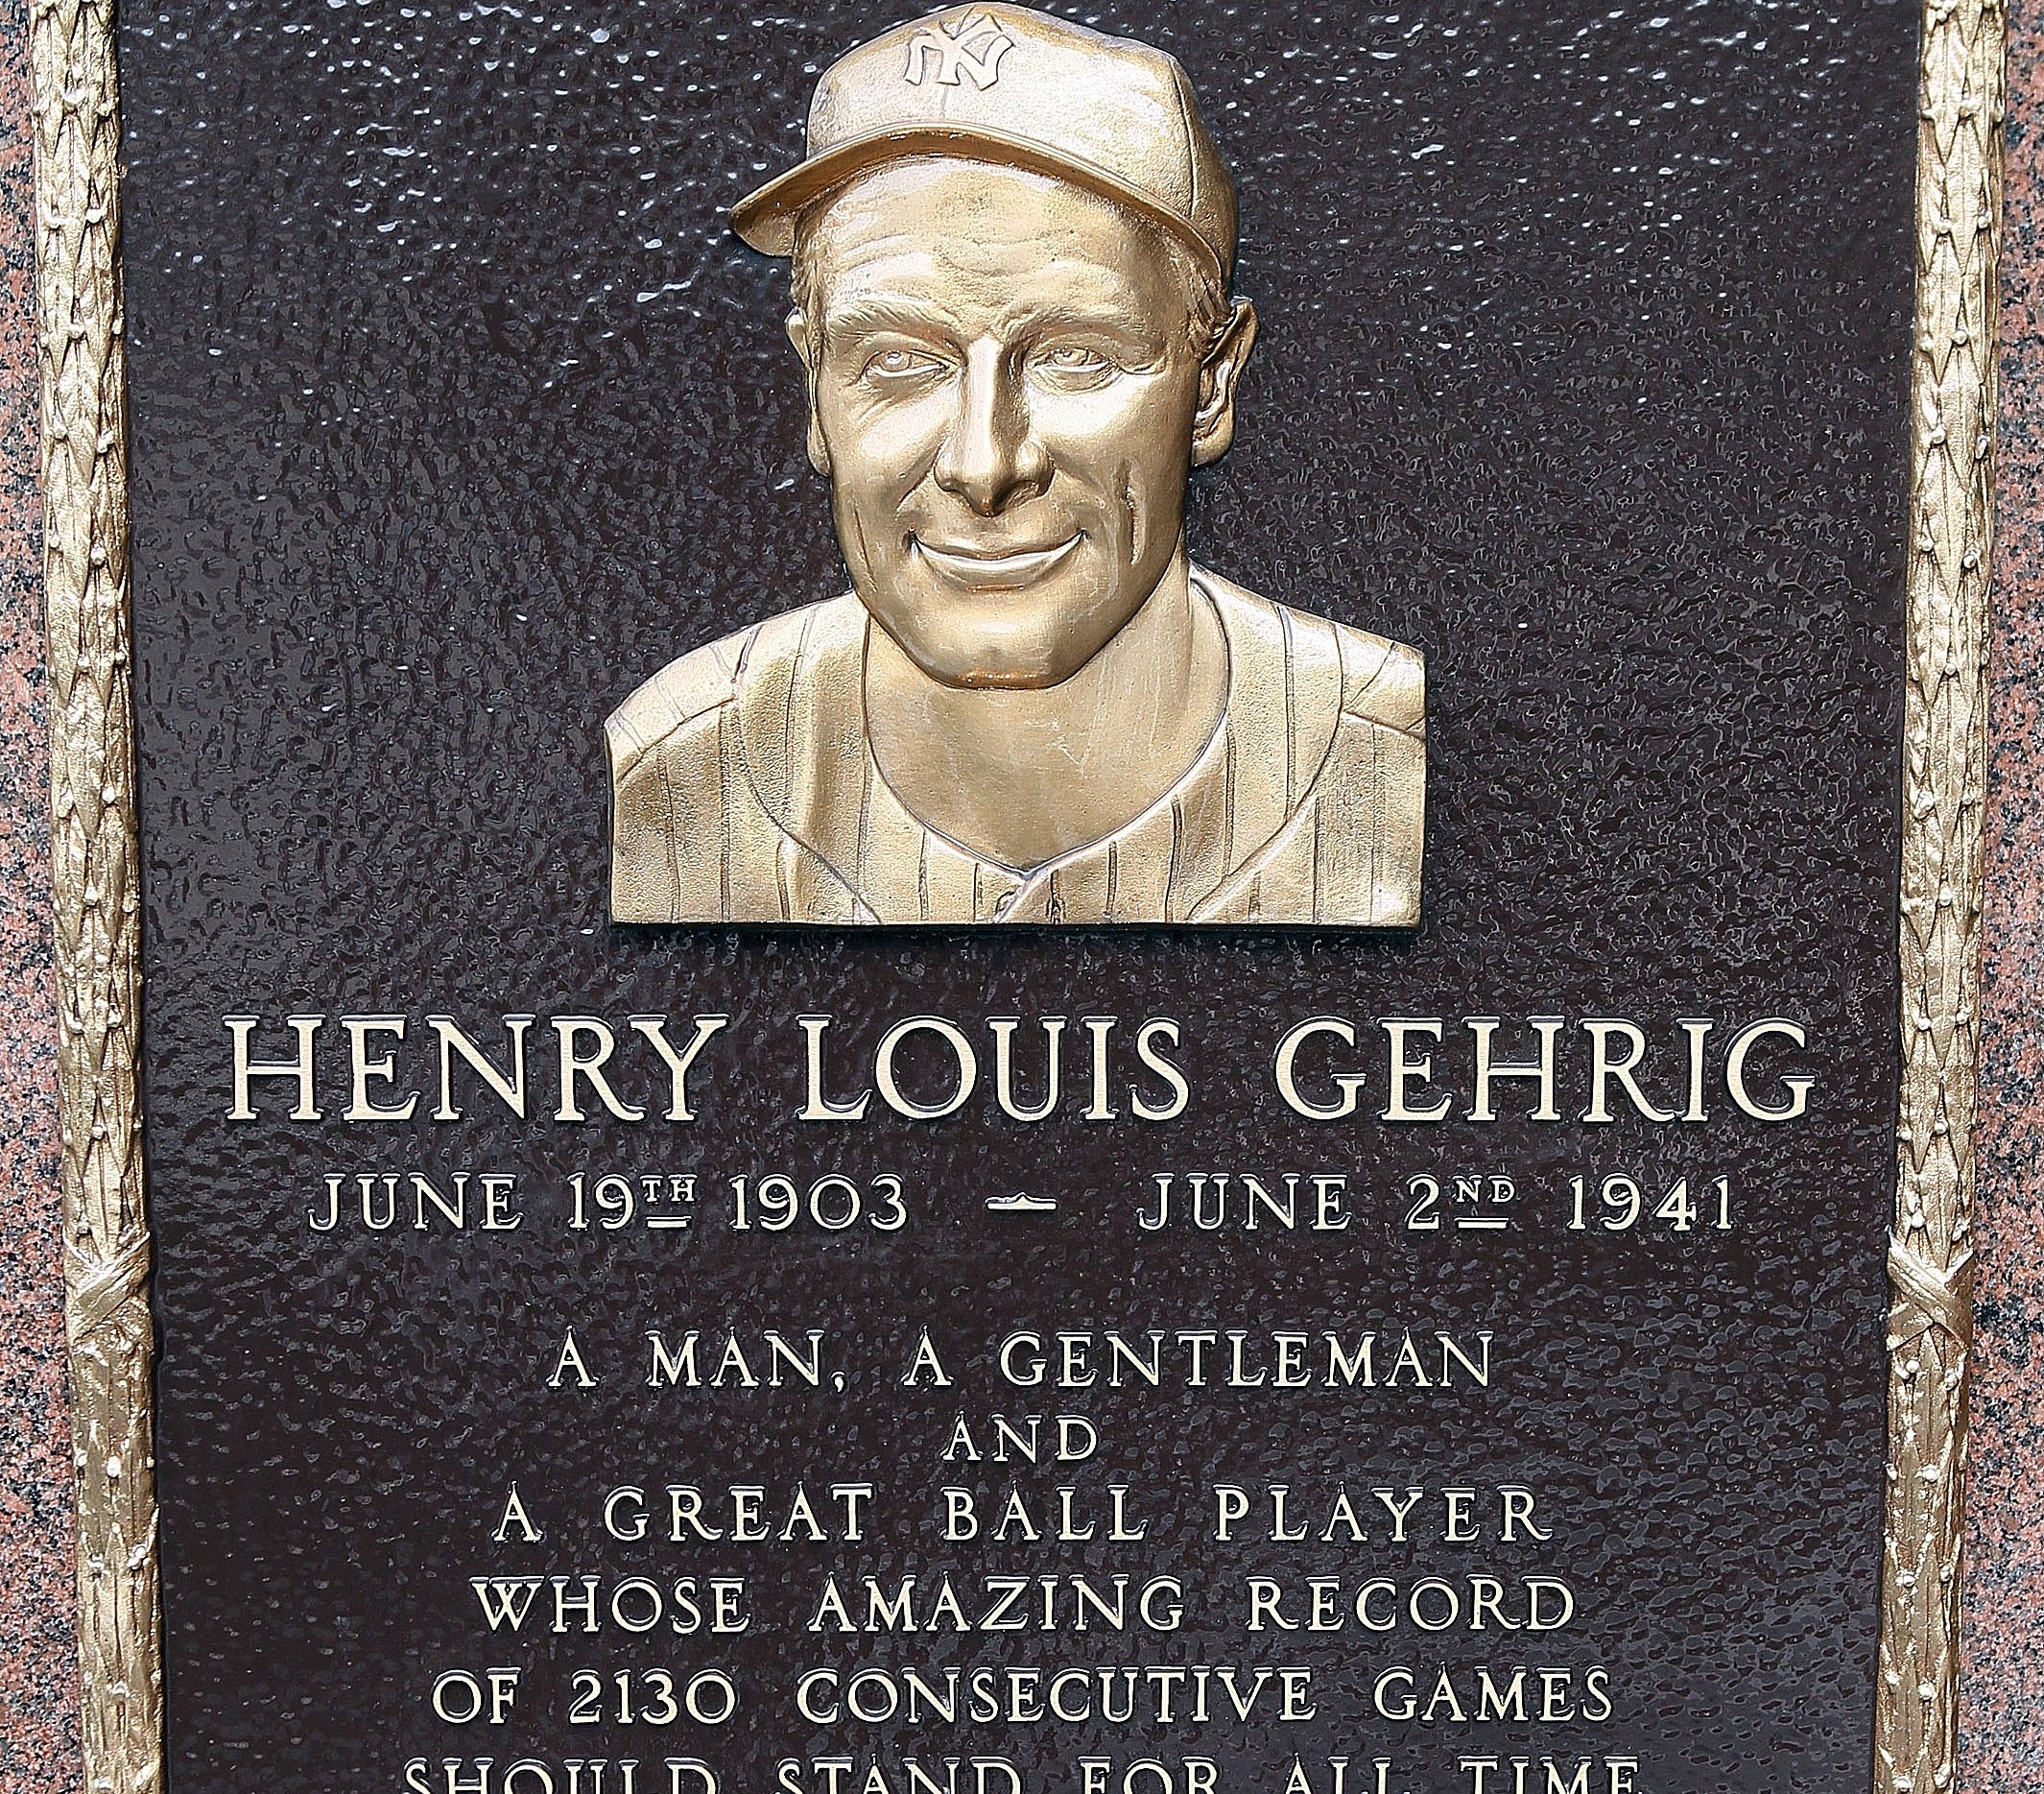 Lou Gehrig's Farewell to Baseball Address (And How One Man Showed